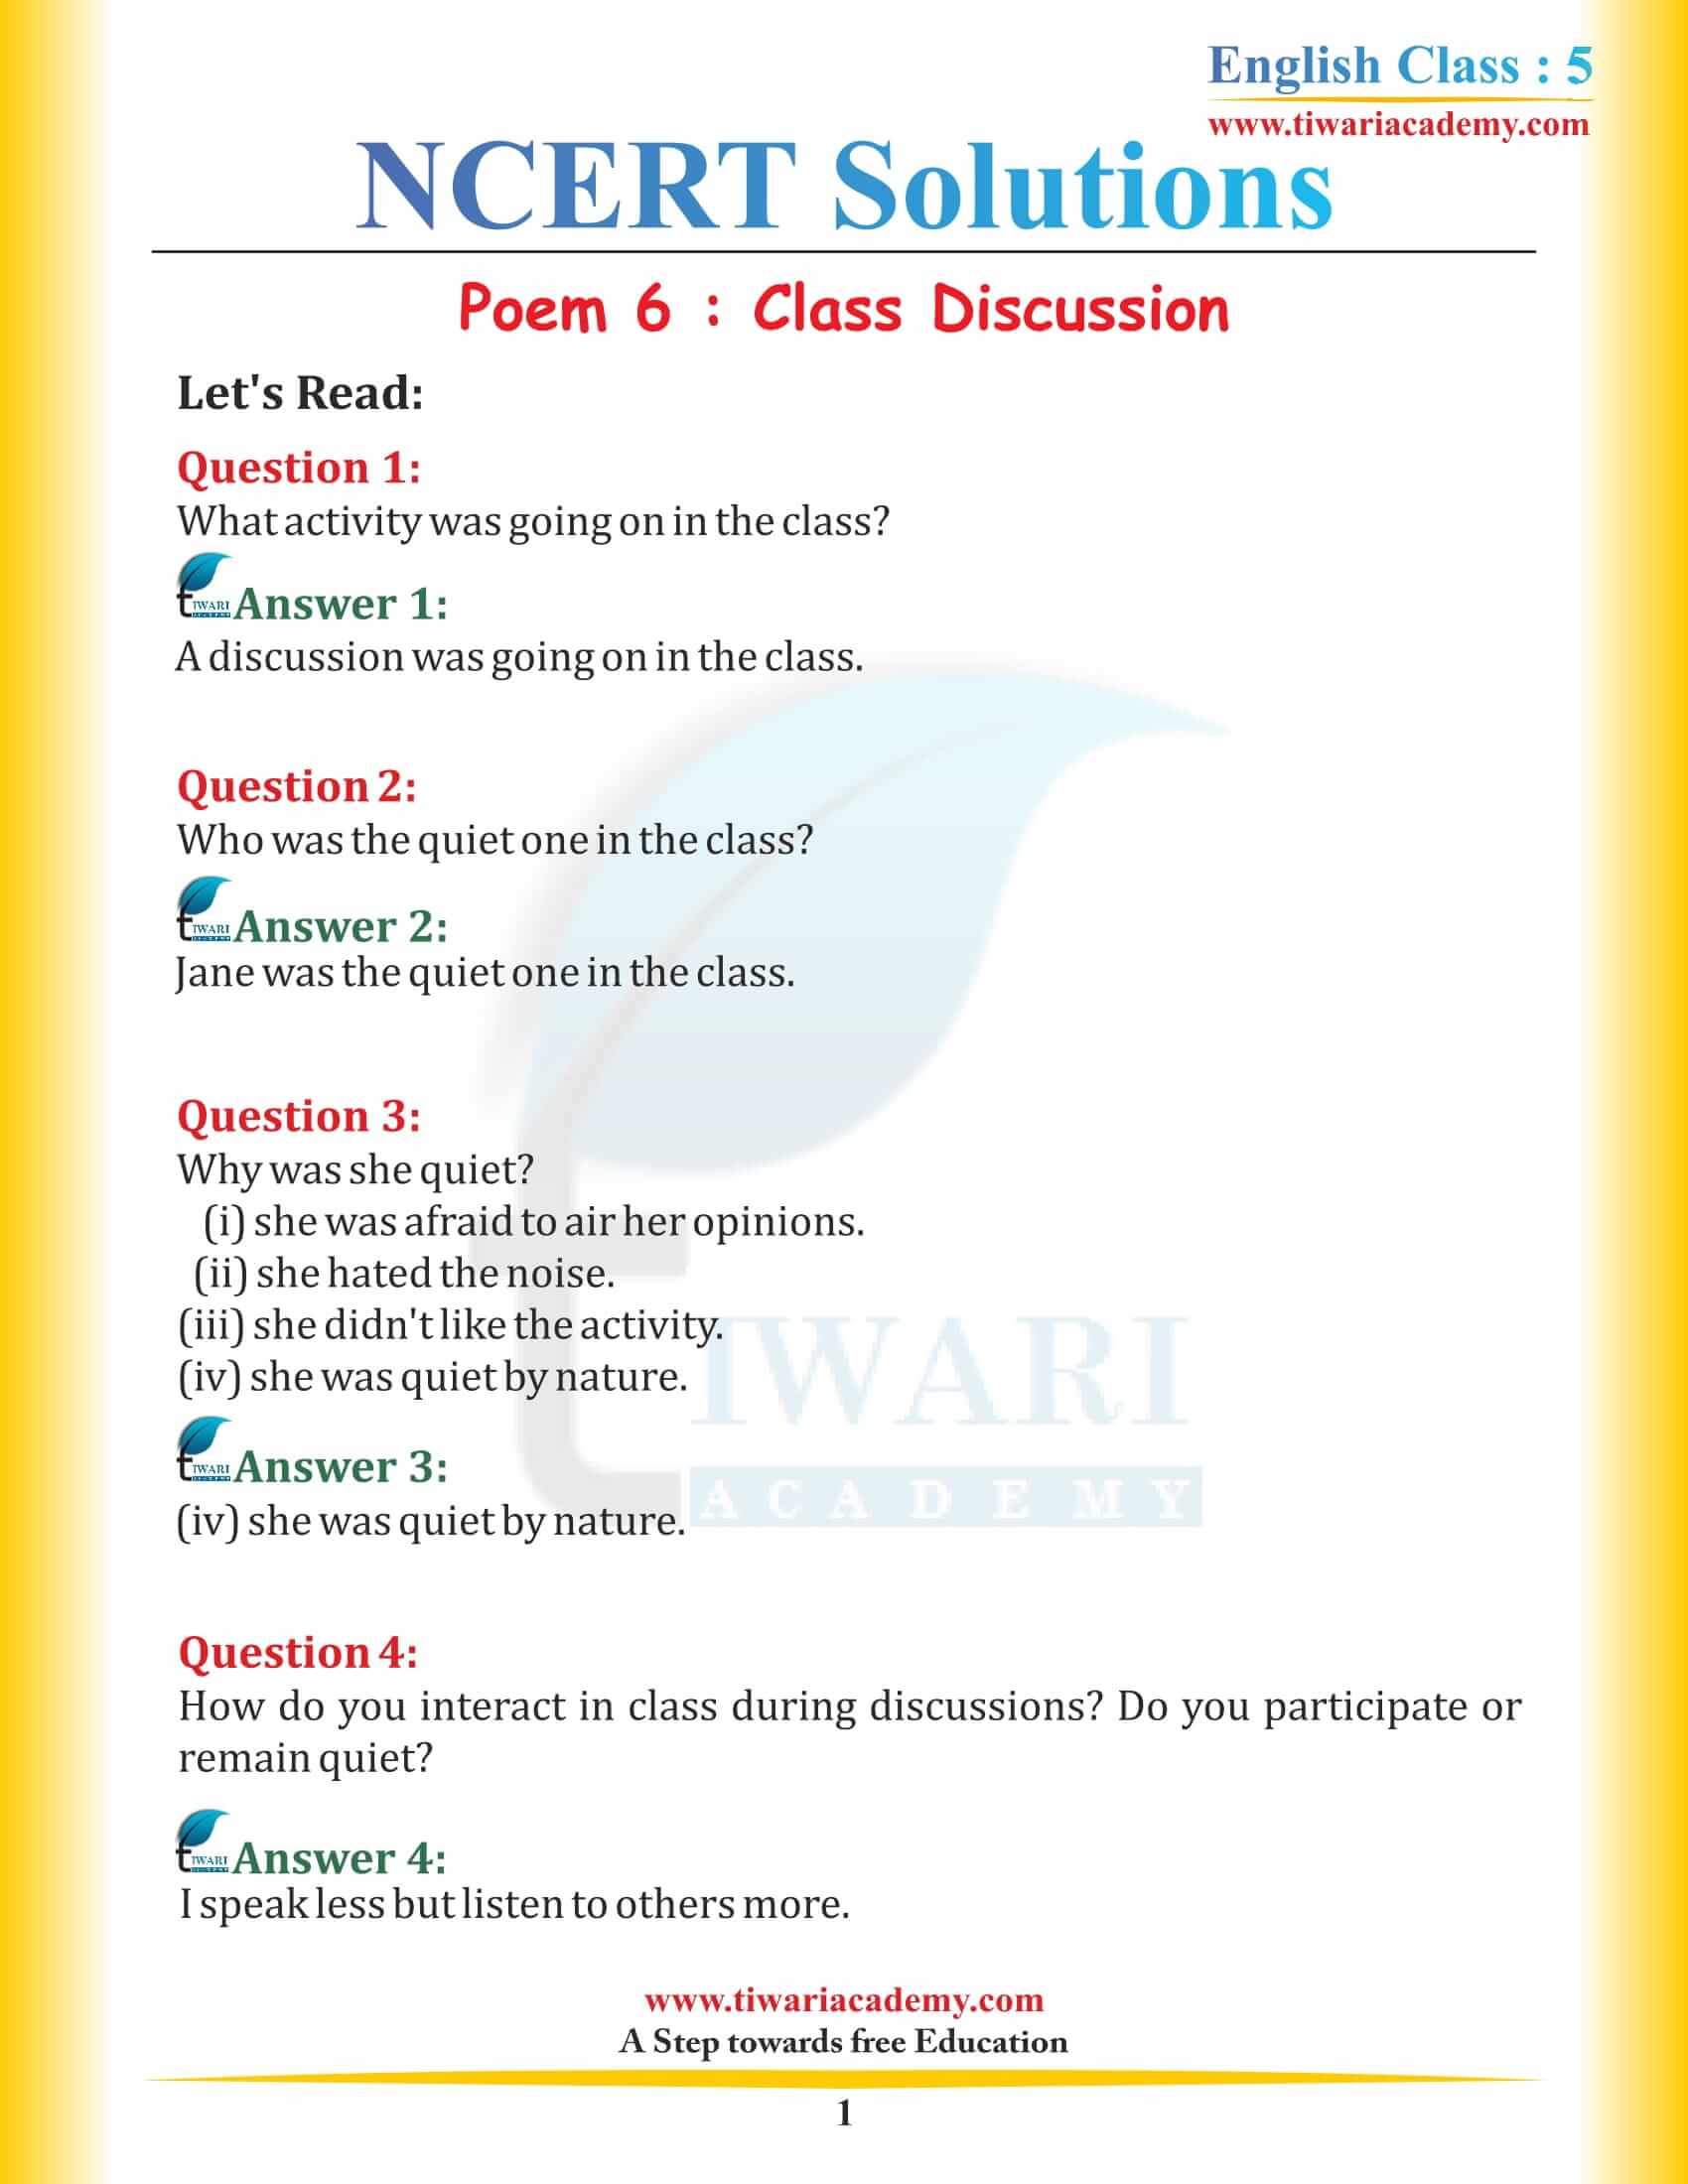 NCERT Solutions for Class 5 English Chapter 6 Class Discussion